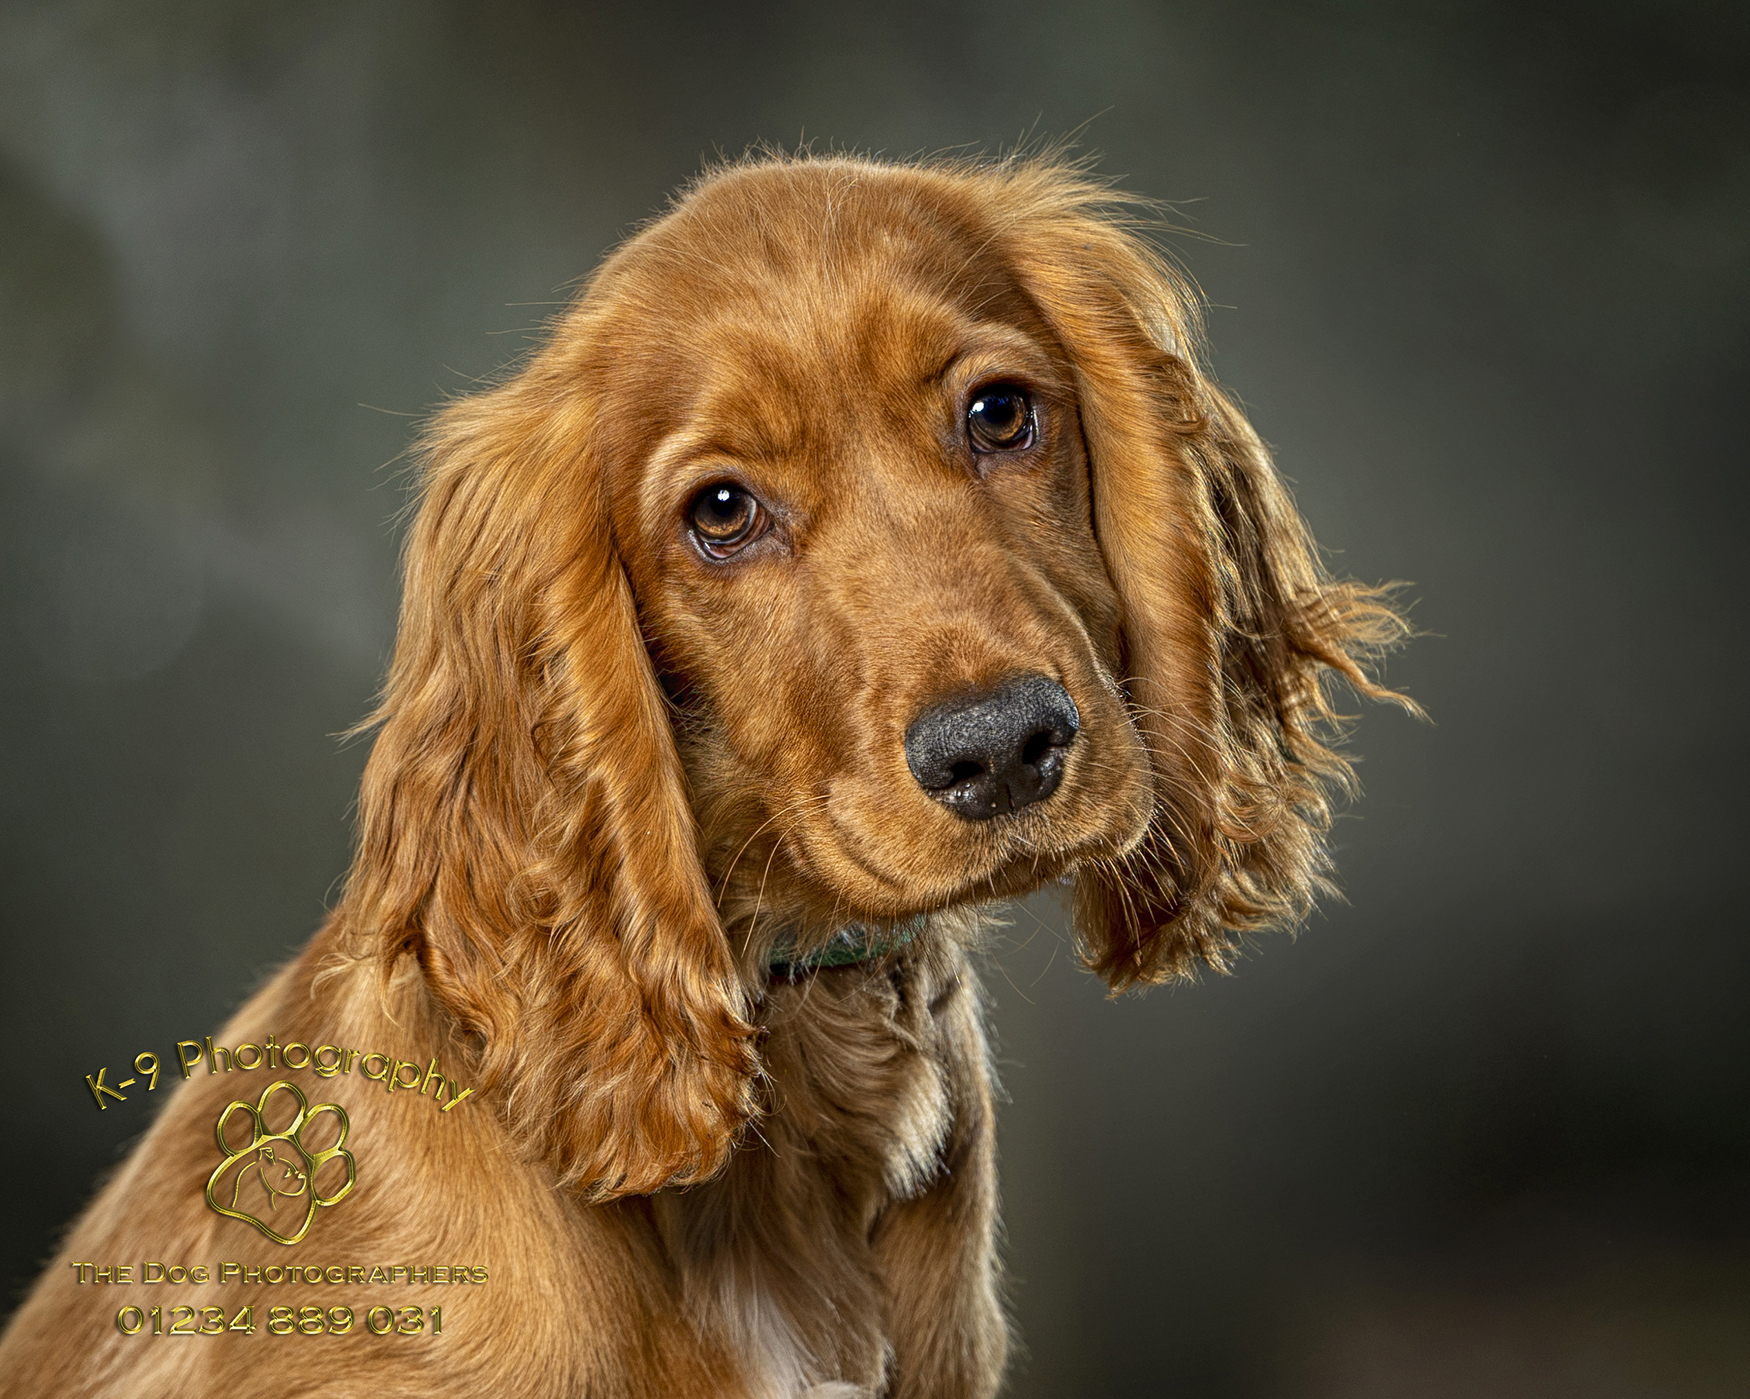 Mastering the Art of Photographing your dog